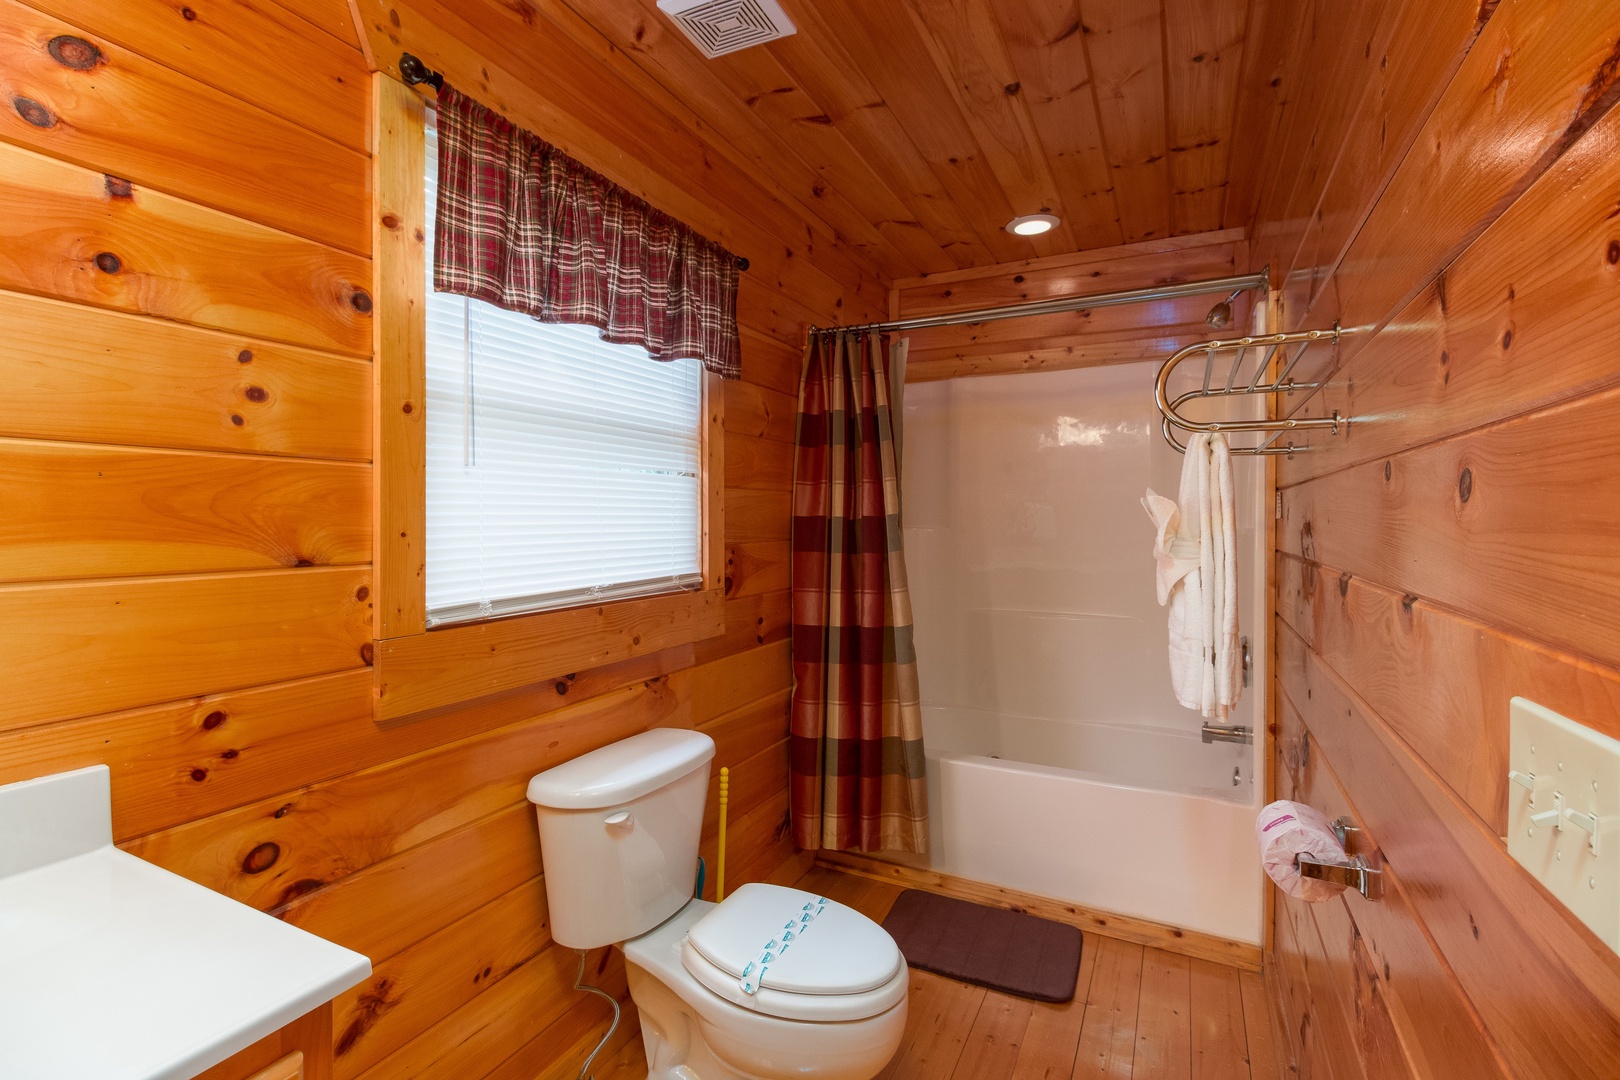 Bathroom with a tub and shower at A Beautiful Memory, a 4 bedroom cabin rental located in Pigeon Forge